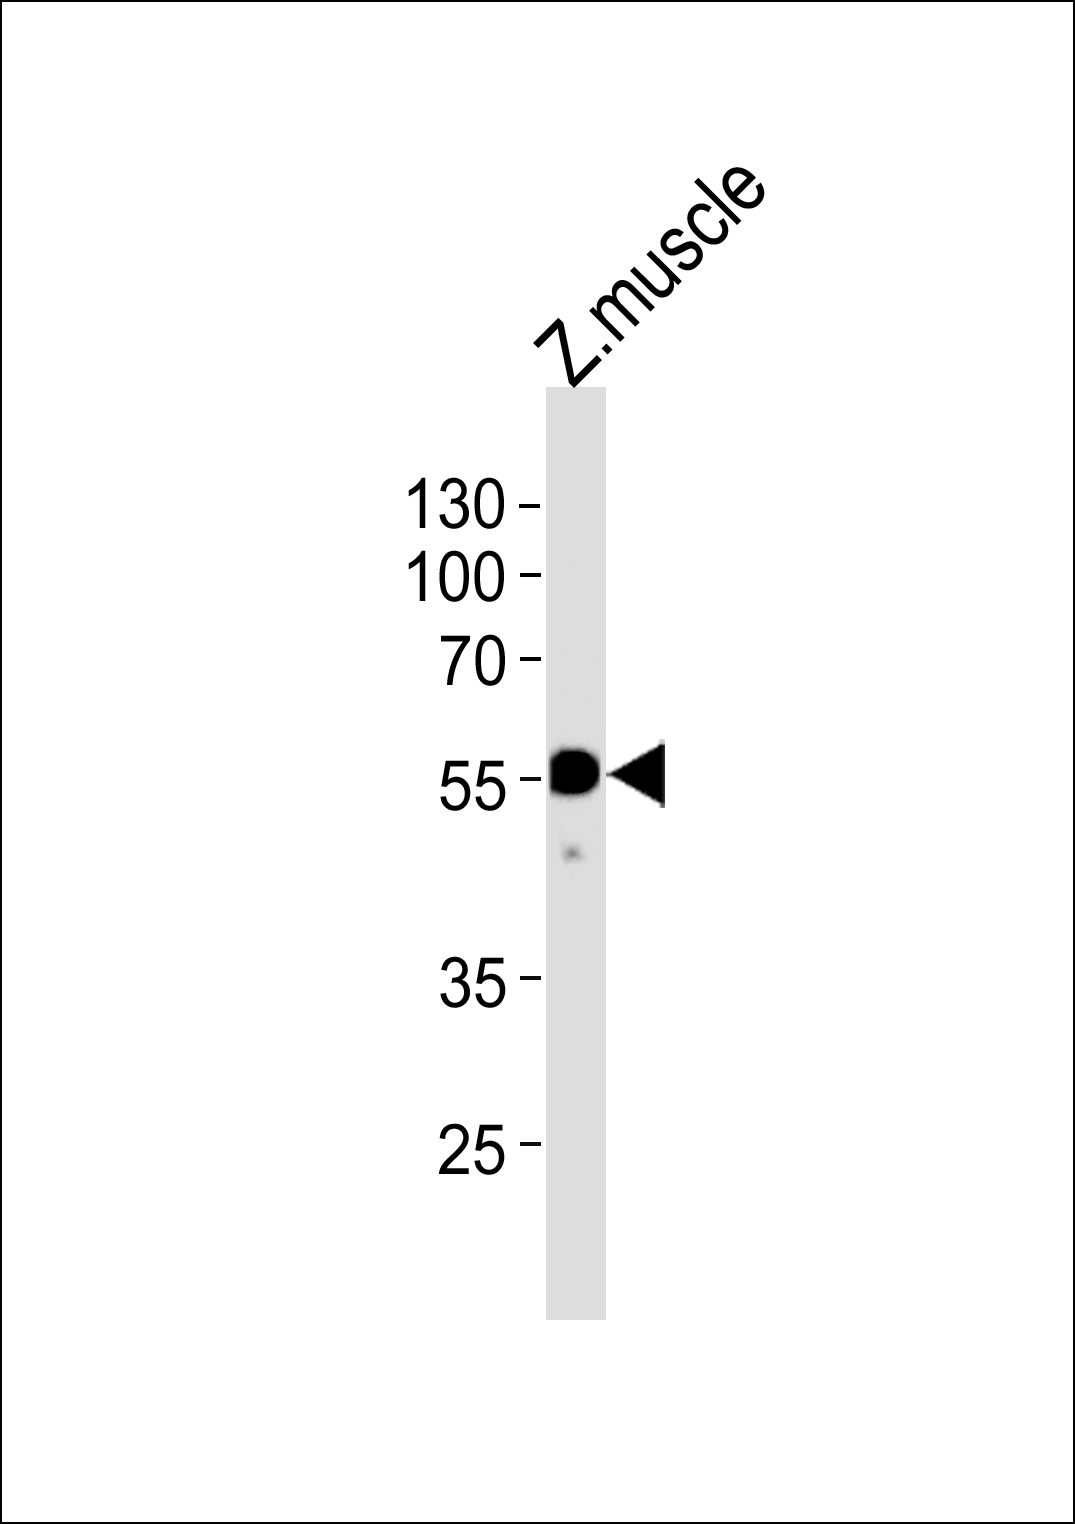 Western blot analysis of lysate from zebra fish muscle tissue lysate,  using DANRE hnf1bb Antibody (Center)(Cat.  #Azb18694a).  Azb18694a was diluted at 1:1000.  A goat anti-rabbit IgG H&L(HRP) at 1:5000 dilution was used as the secondary antibody.  Lysate at 35ug.